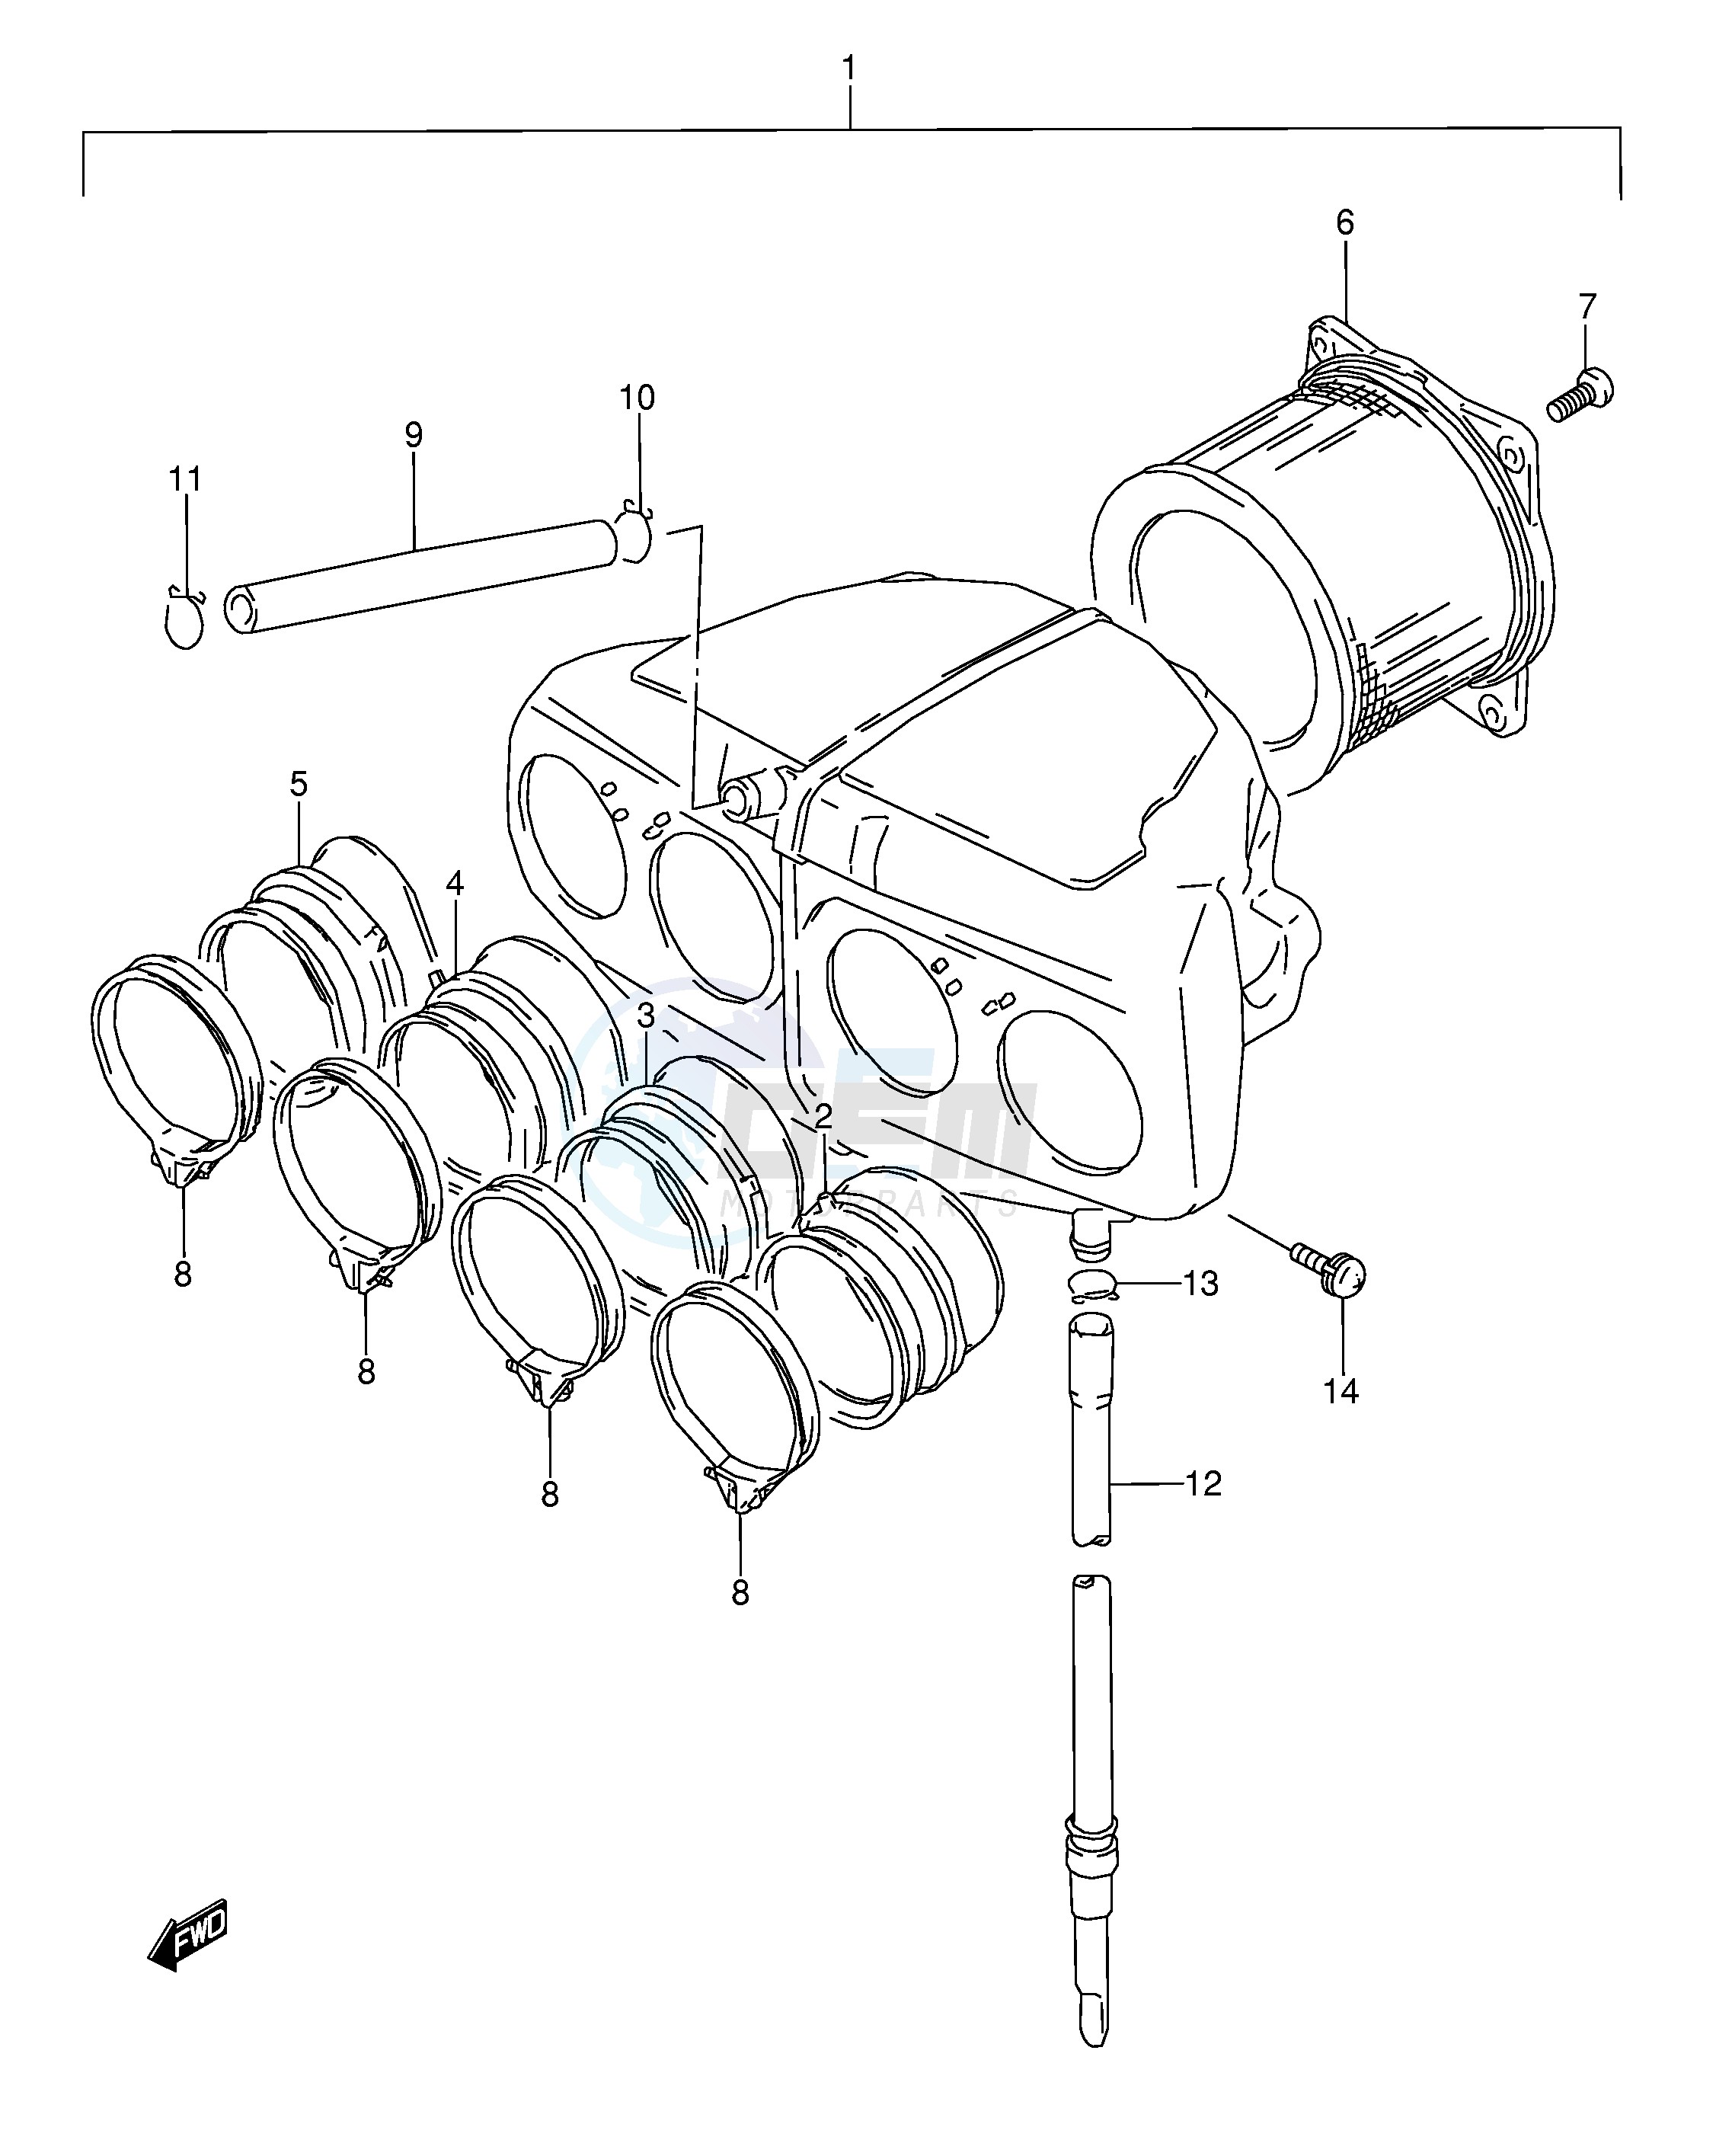 AIR CLEANER (SEE NOTE 1) blueprint